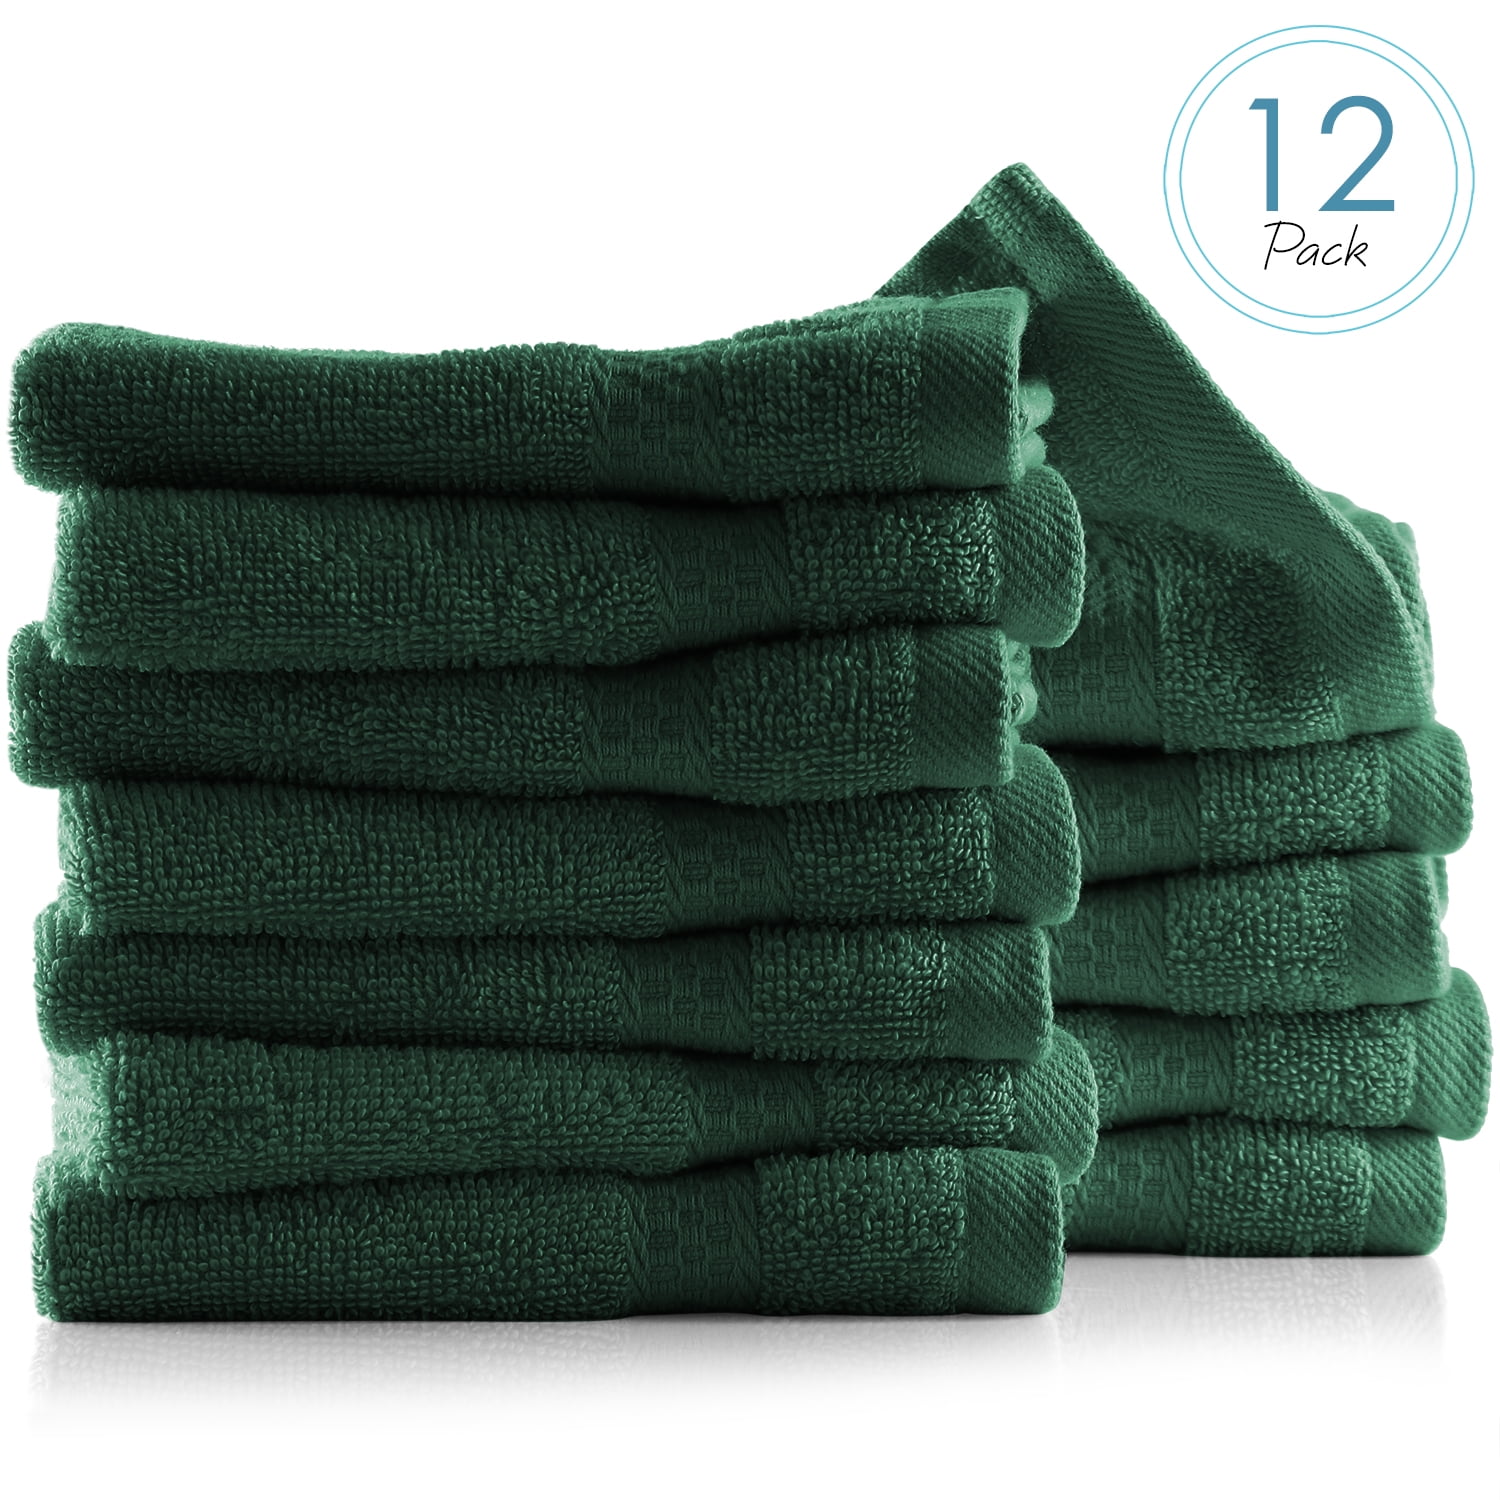 LUXURY 700 GSM PACK OF 12 100% COTTON FACE CLOTH TOWELS FLANNELS WASH CLOTH !!! 